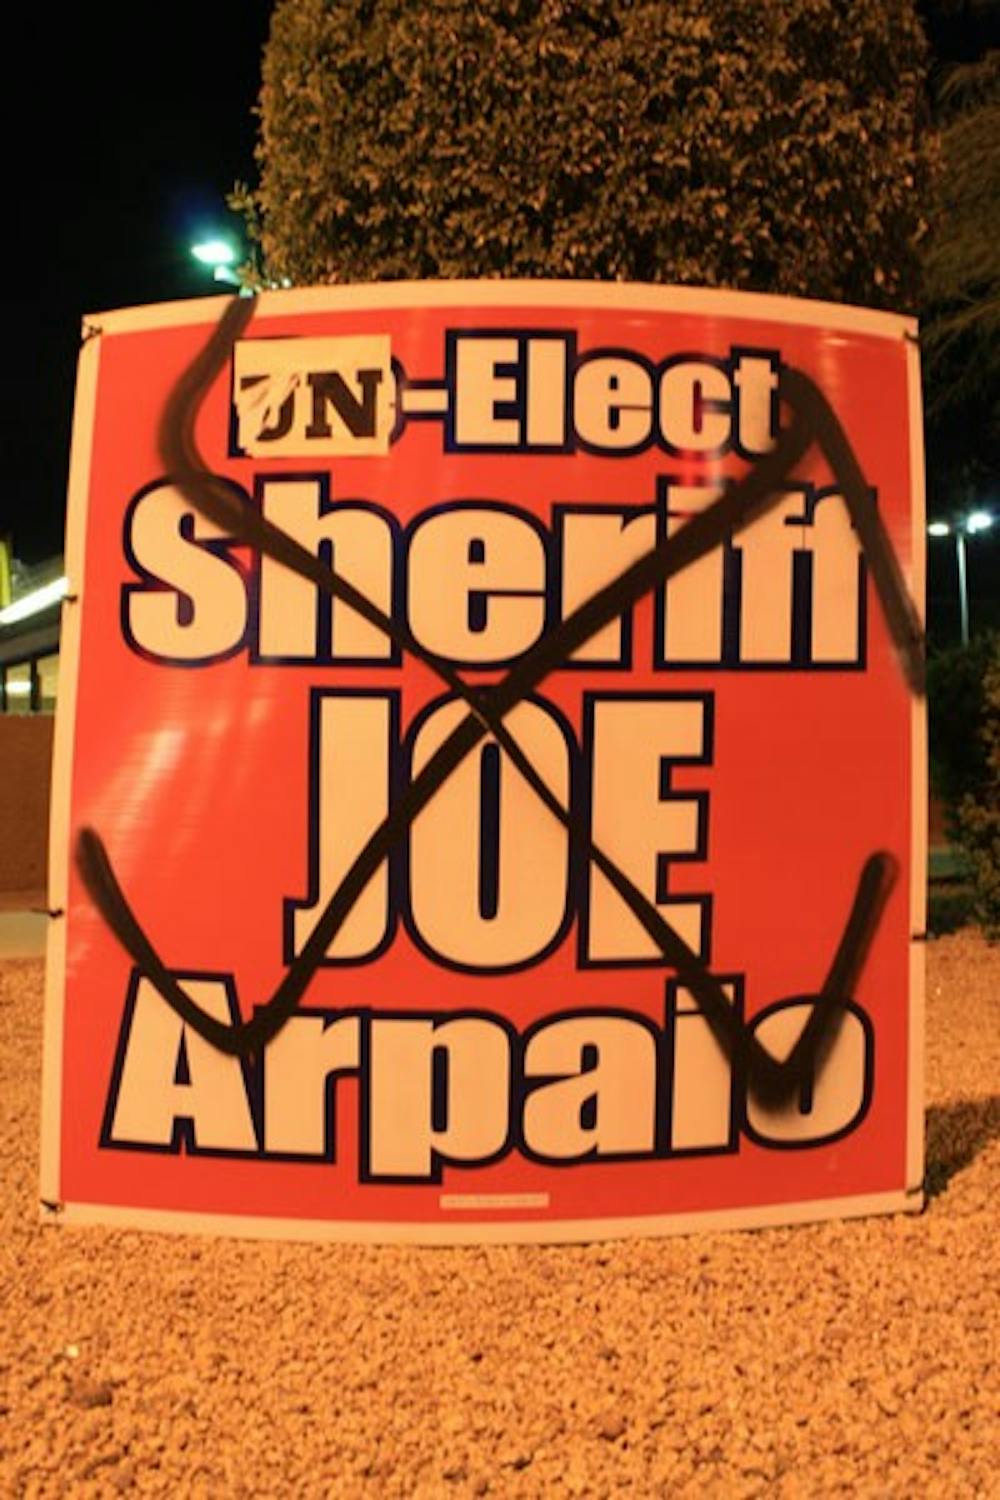 A re-election sign for Maricopa County Sheriff Joe Arpaio was vandalized on 7th Street and McDowell Road in Phoenix. Both Arpaio and his main opponent, former Phoenix police officer Paul Penzone, have had signage vandalized or stolen. (Photo by Jessie Wardarski)